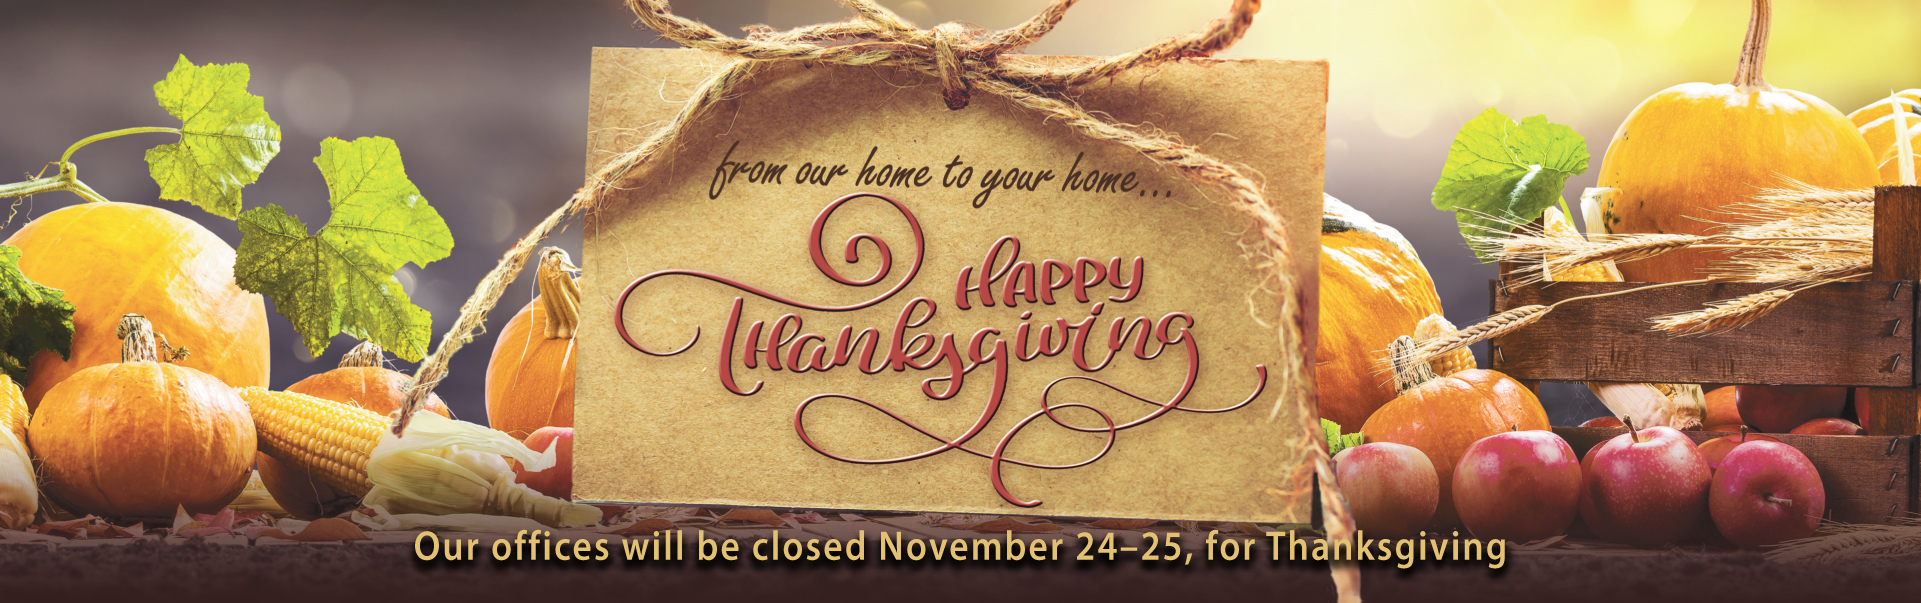 Our offices will be closed Thursday, November 24 and Friday, November 25 for Thanksgiving